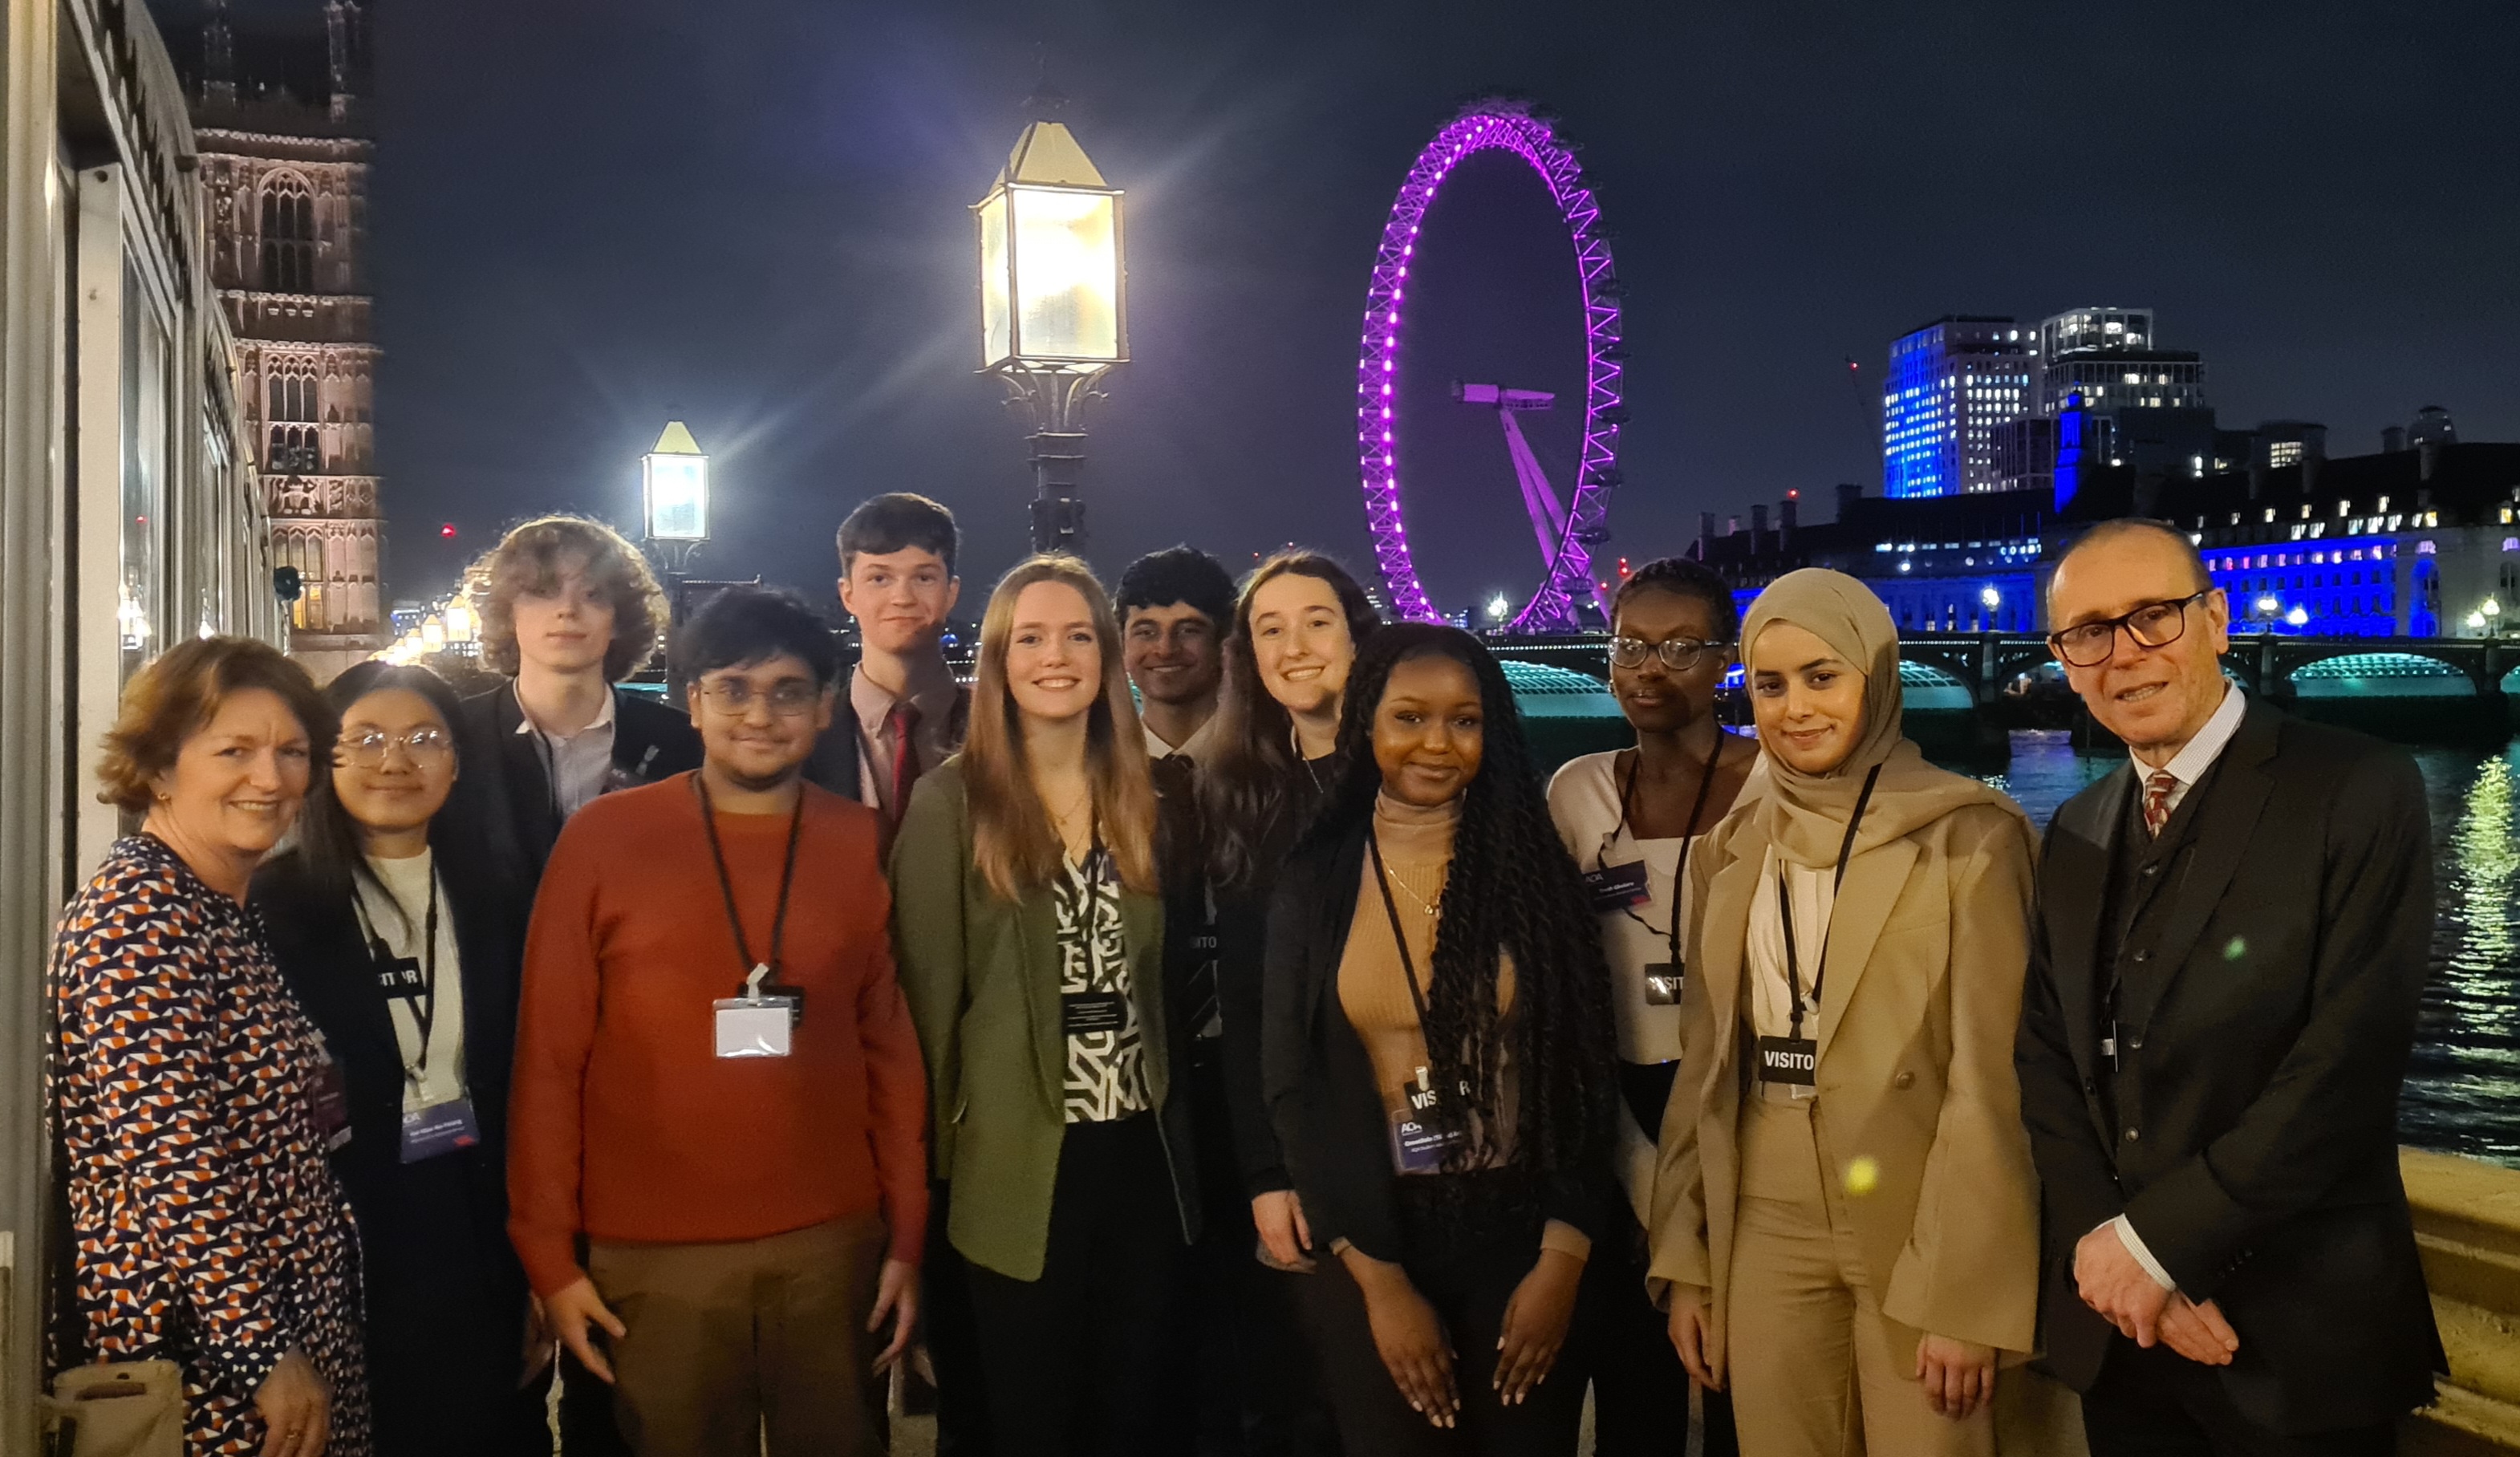 Student Advisory Group members on Westminster Terrace at the Houses of Parliament, with AQA Trustee Elizabeth Kitcatt (far left), new group co-chair Cerys McGrath (centre) and AQA CEO Colin Hughes (far right).